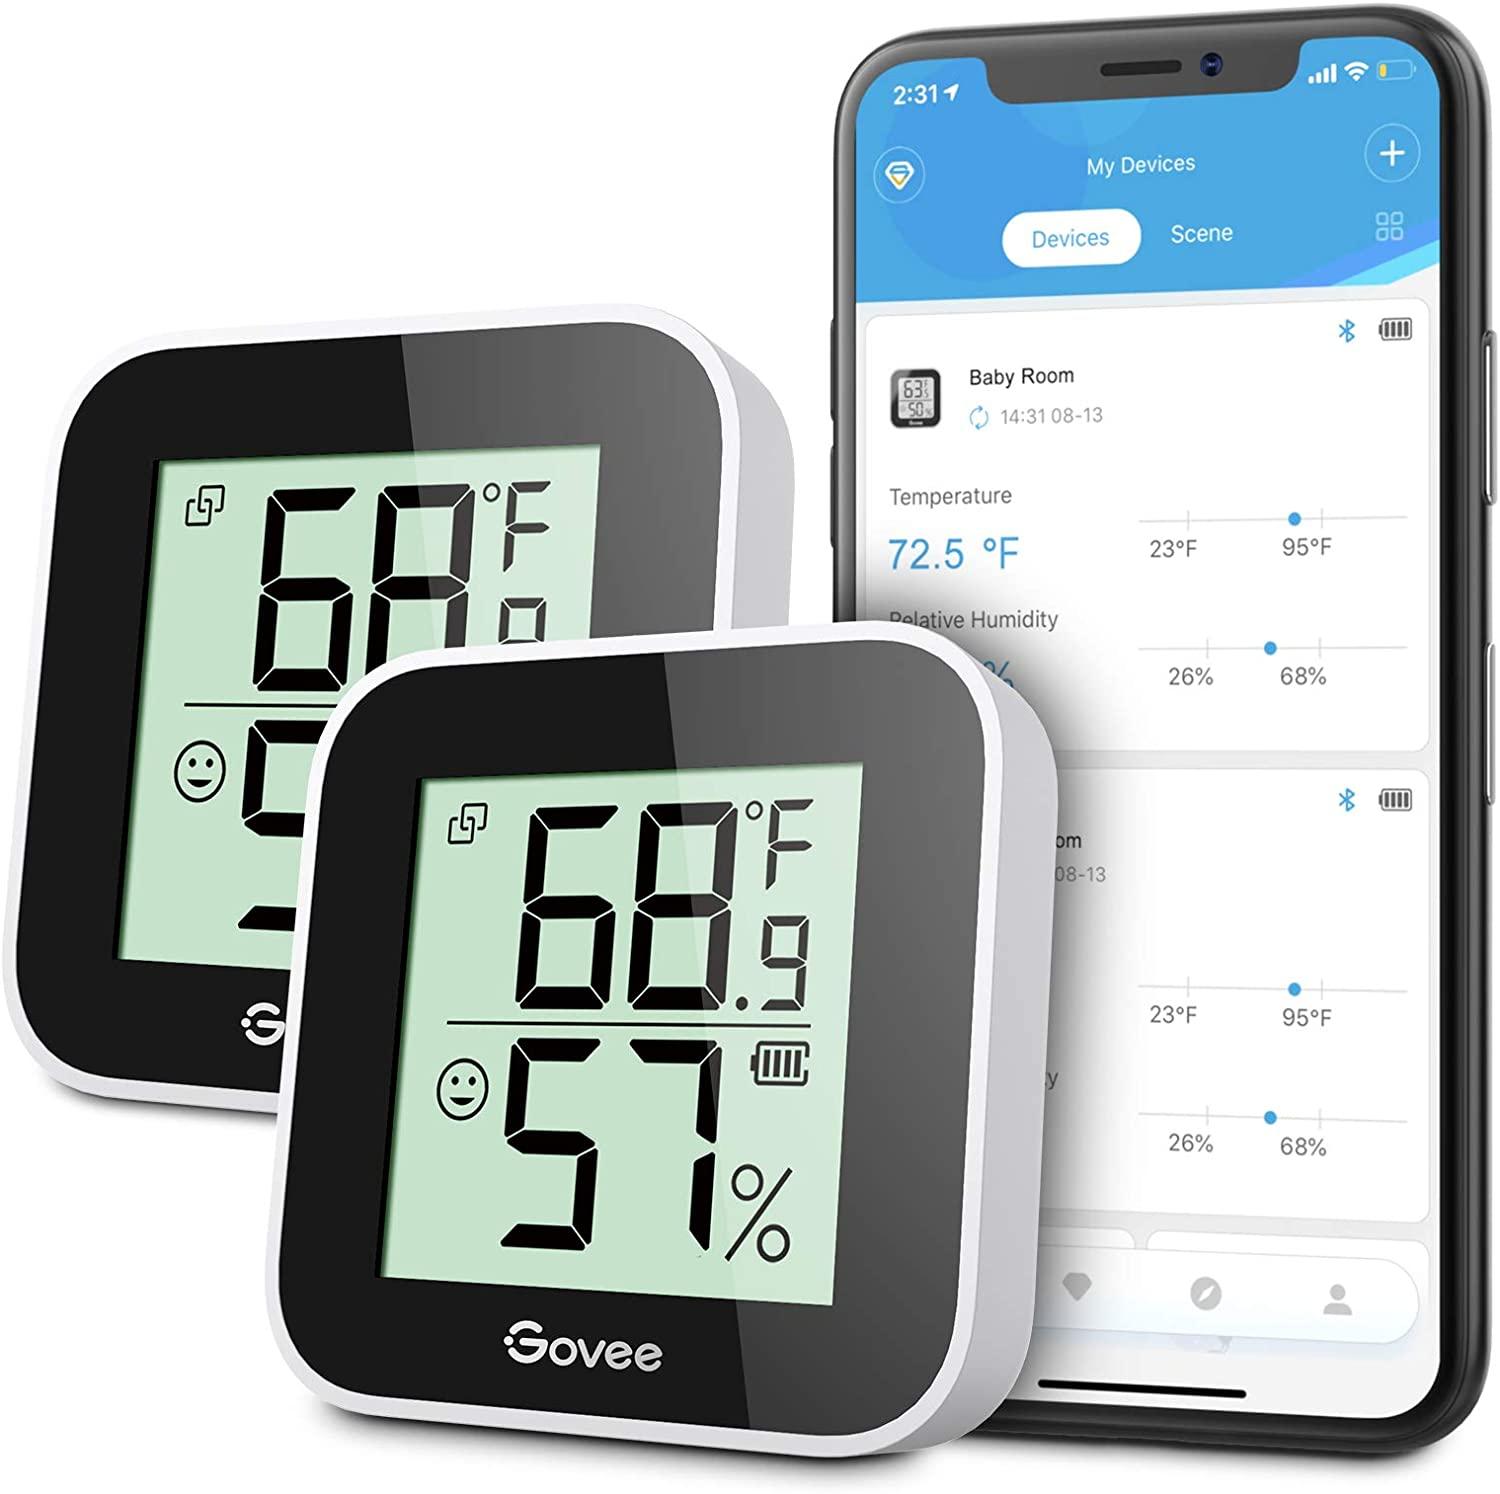 2 Govee Temperature Humidity Monitor for $14.99